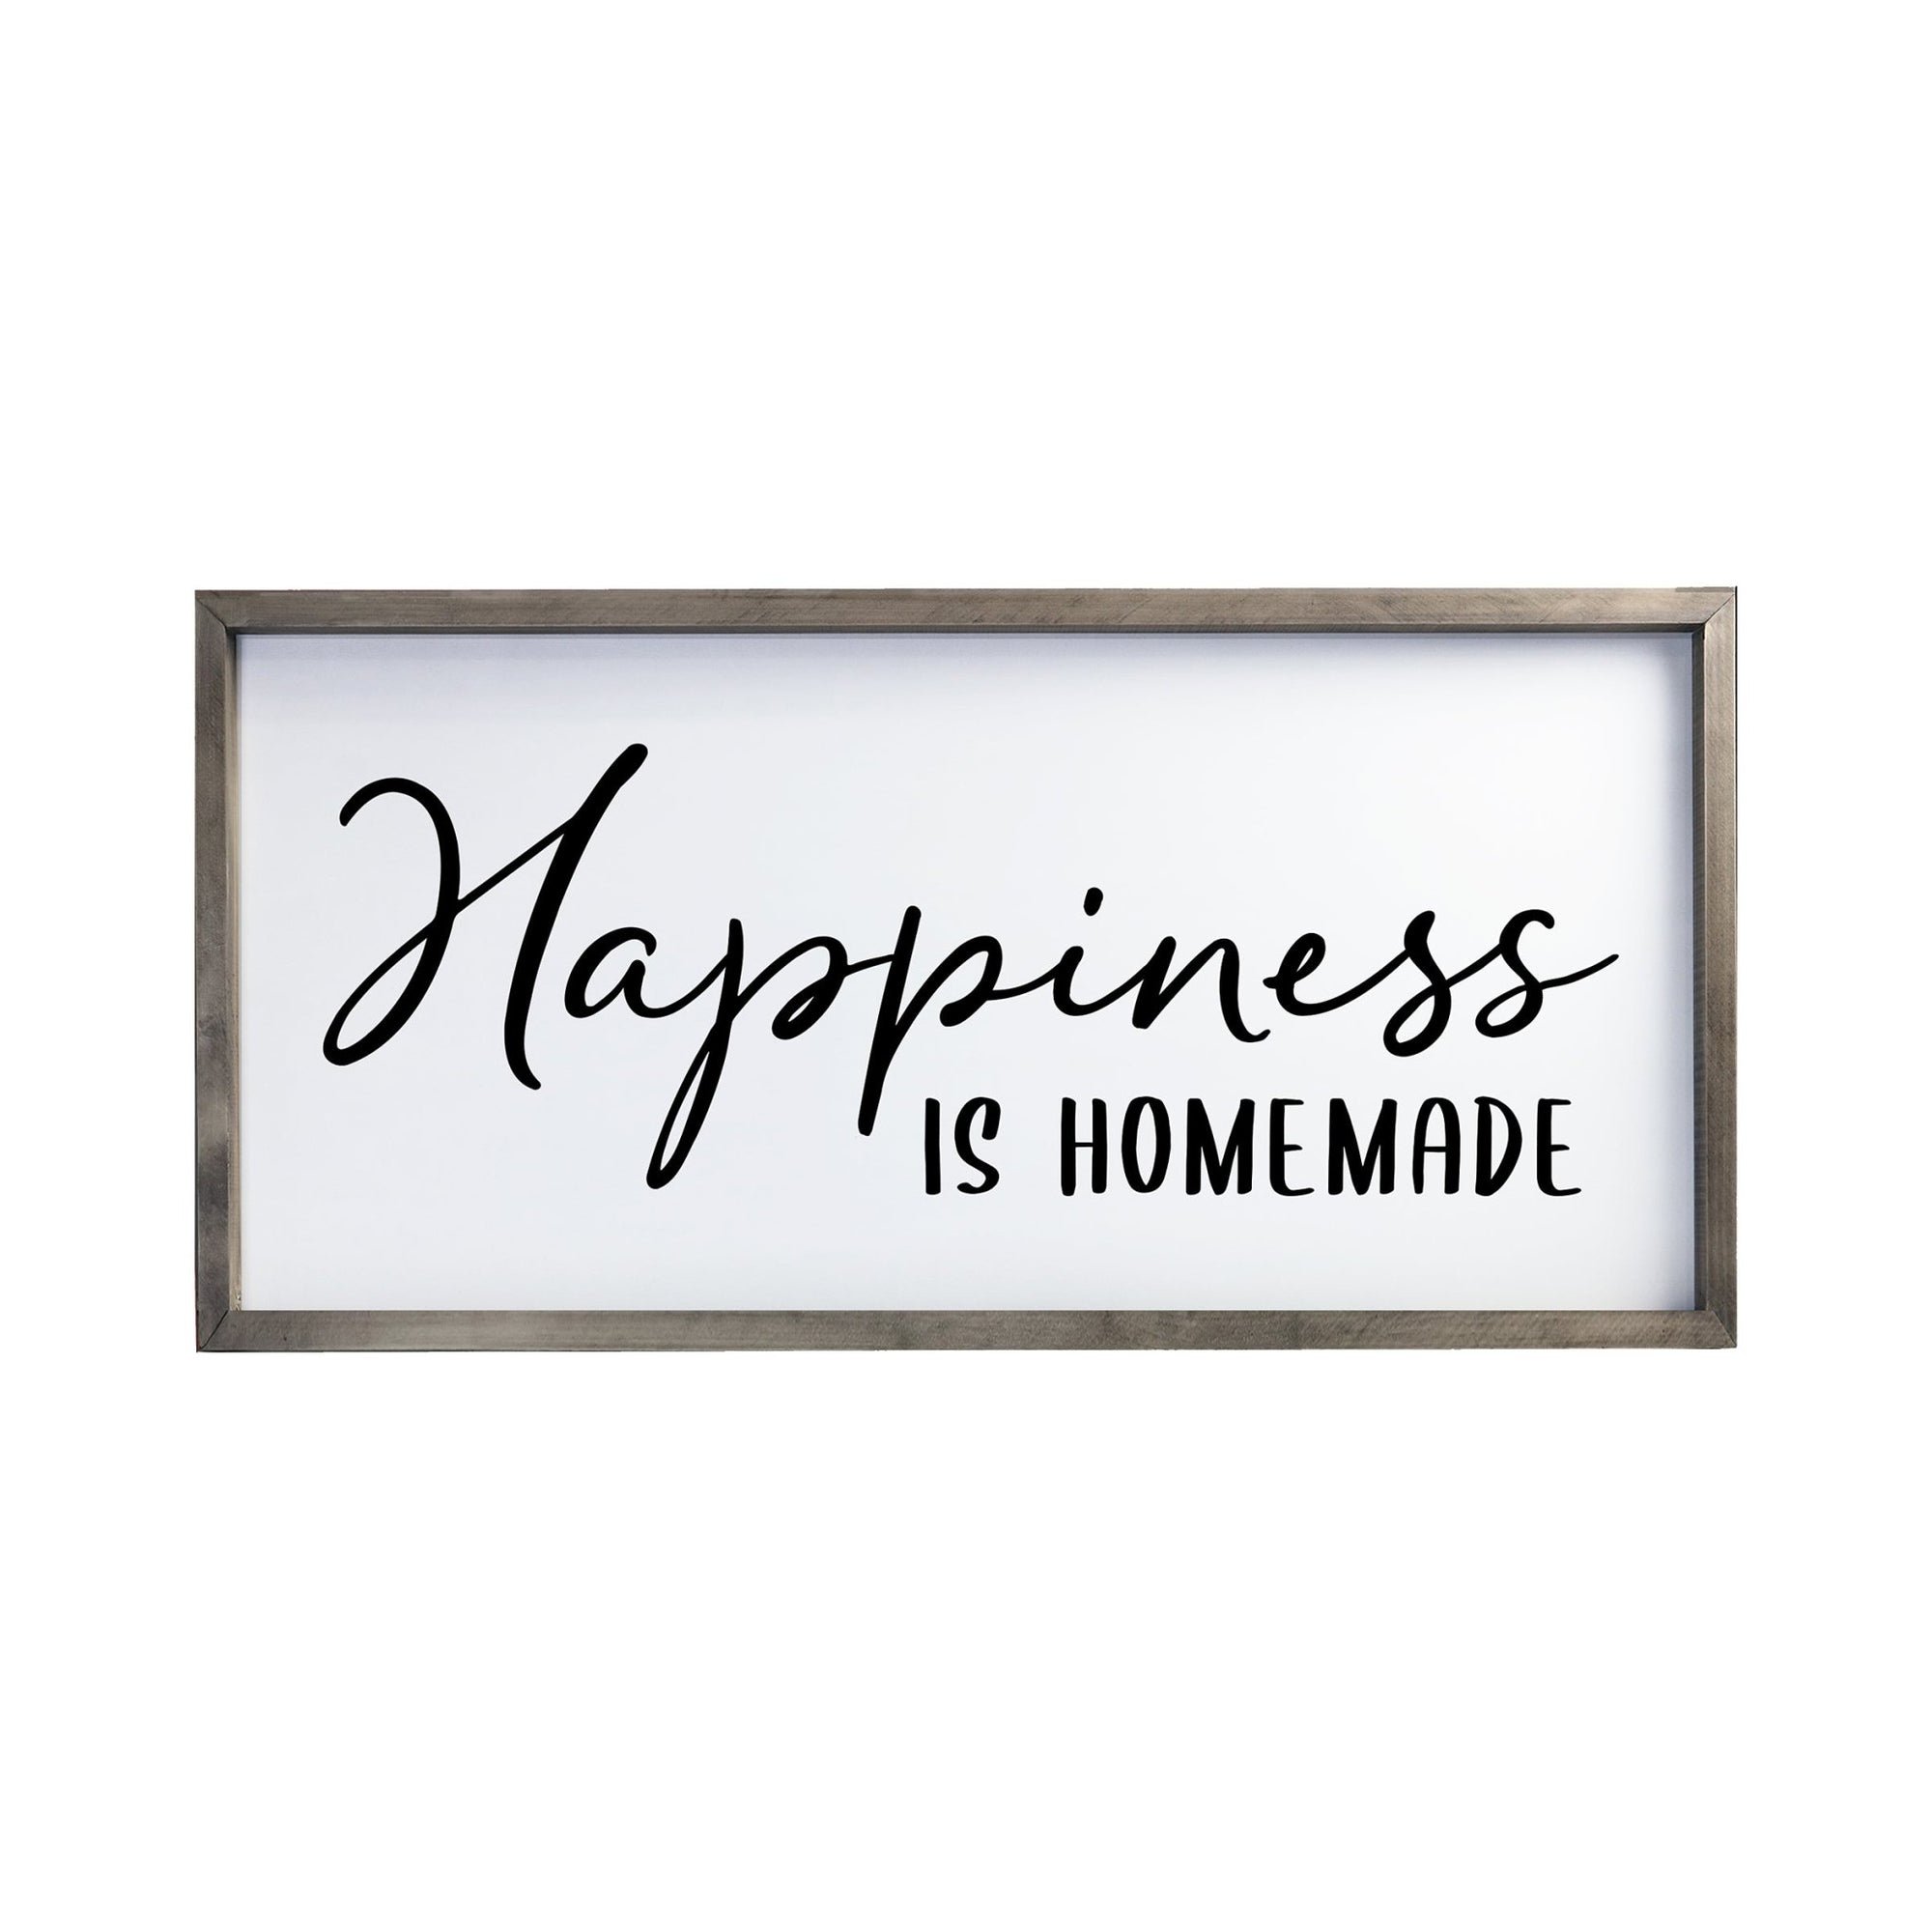 Large Family Wall Decor Quote Sign For Home 18 x 36 - Happiness Is Homemade - LifeSong Milestones